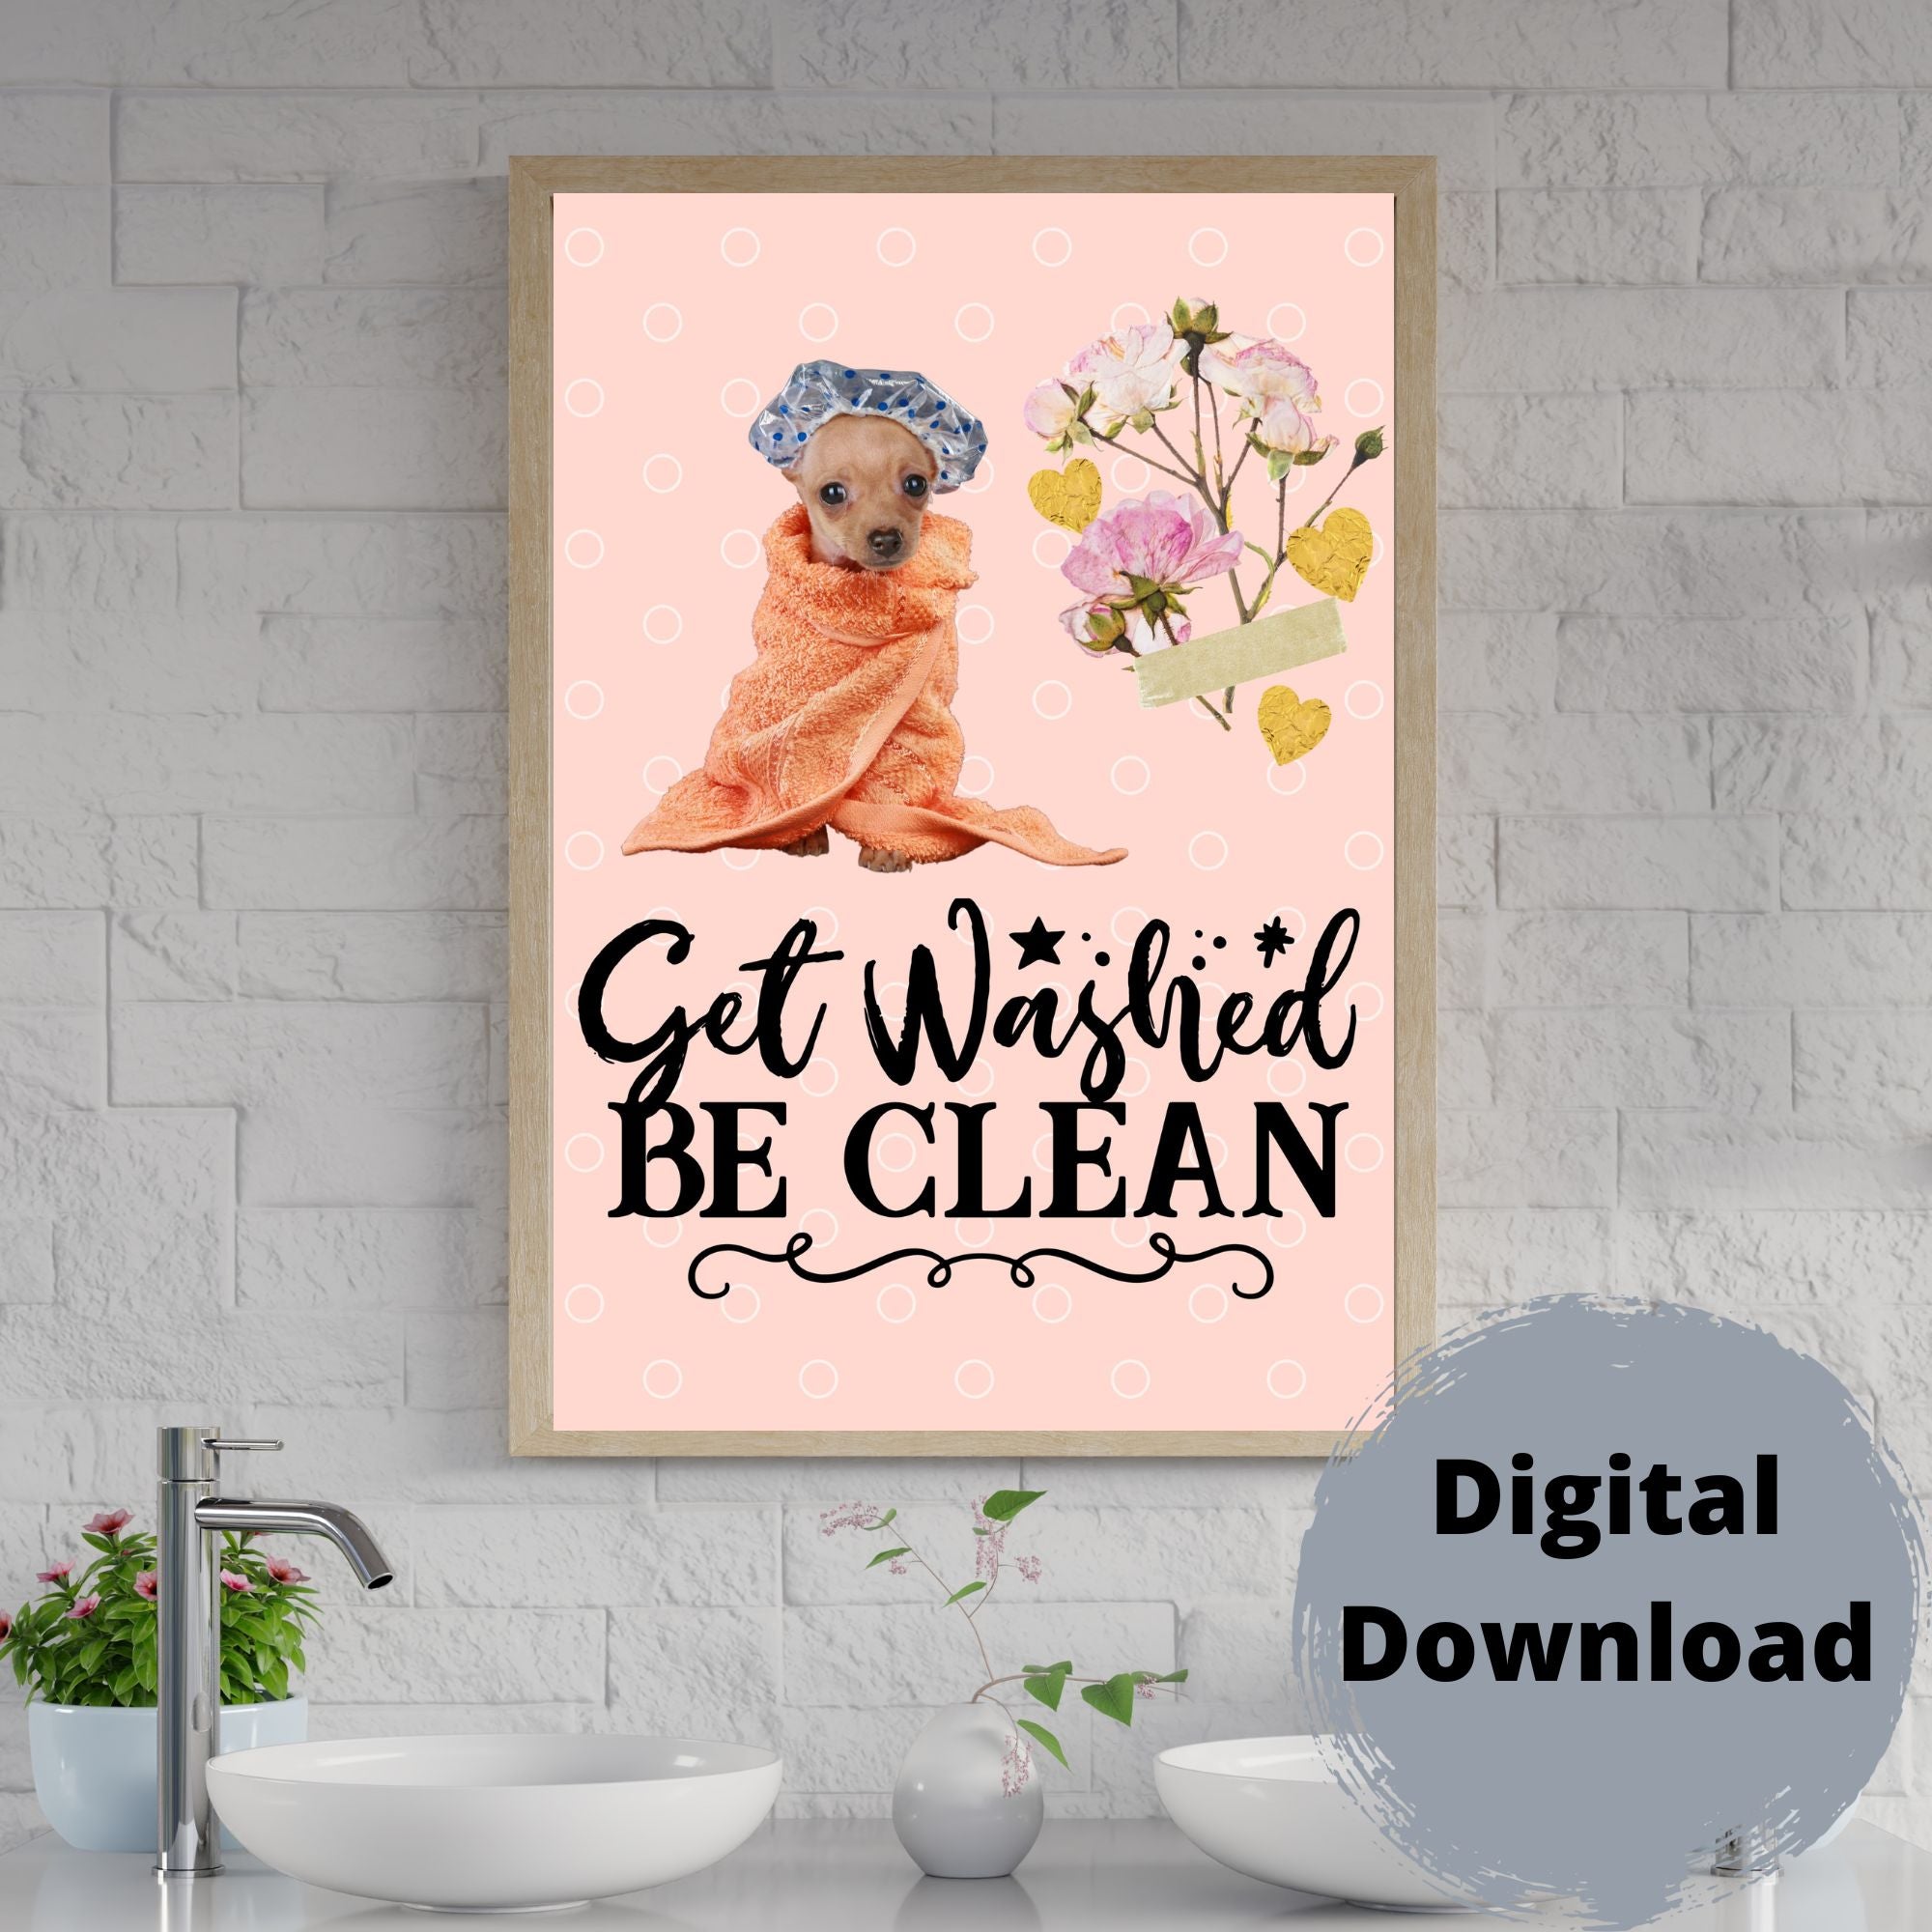 Bathroom Humor Printable Wall Art with Chihuahua Dog "Get Washed Be Clean" Digital Image Download